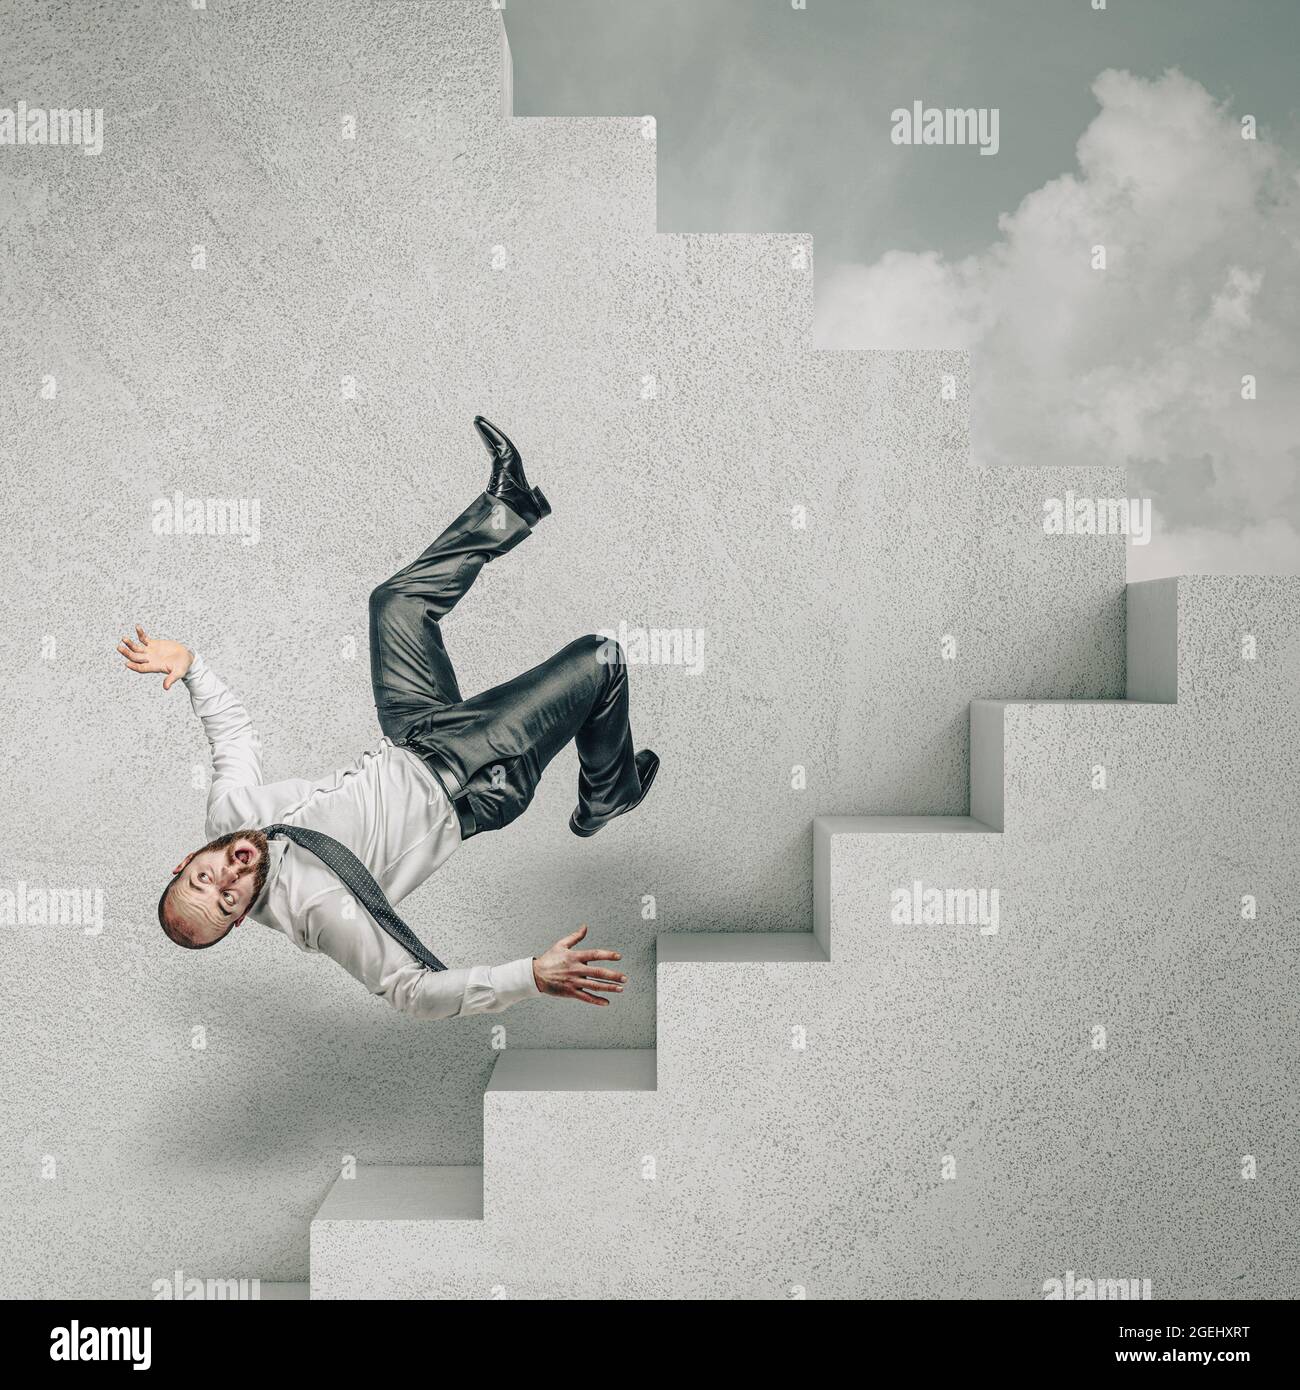 man falling down the stairs Stock Photo